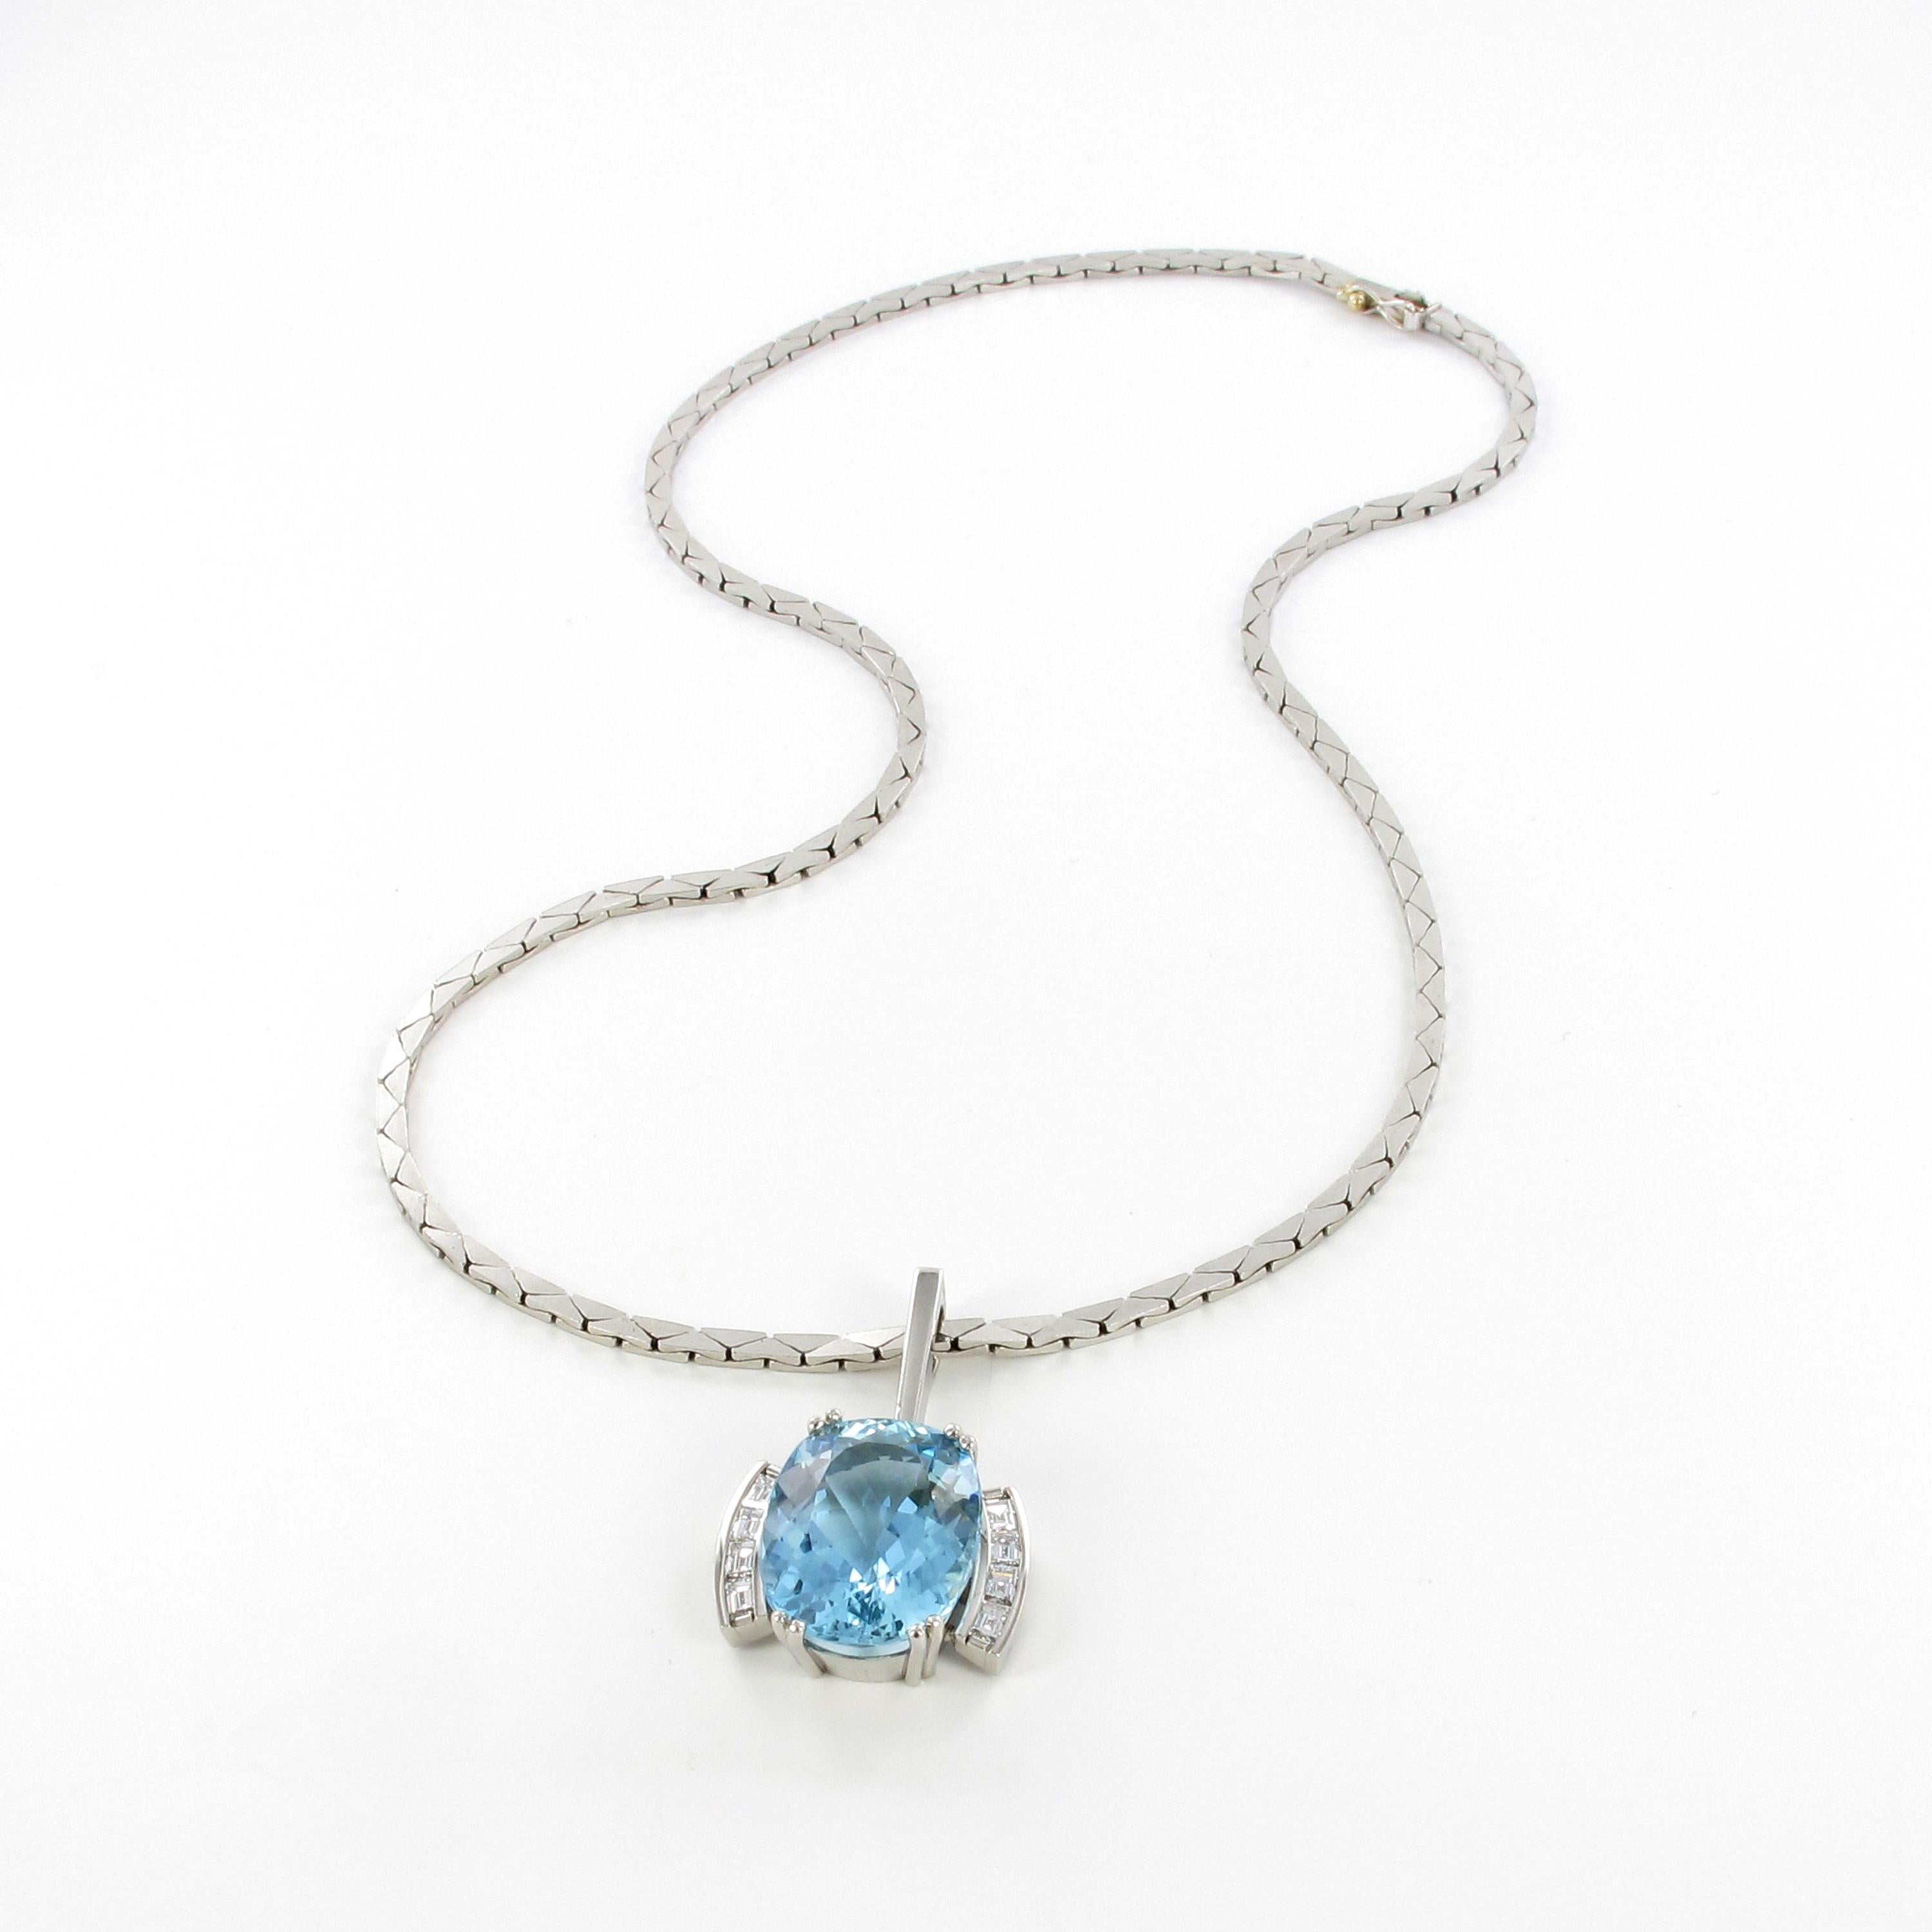 Aquamarine and Diamond Necklace in Platinum 950 and 18 Karat White Gold For Sale 4